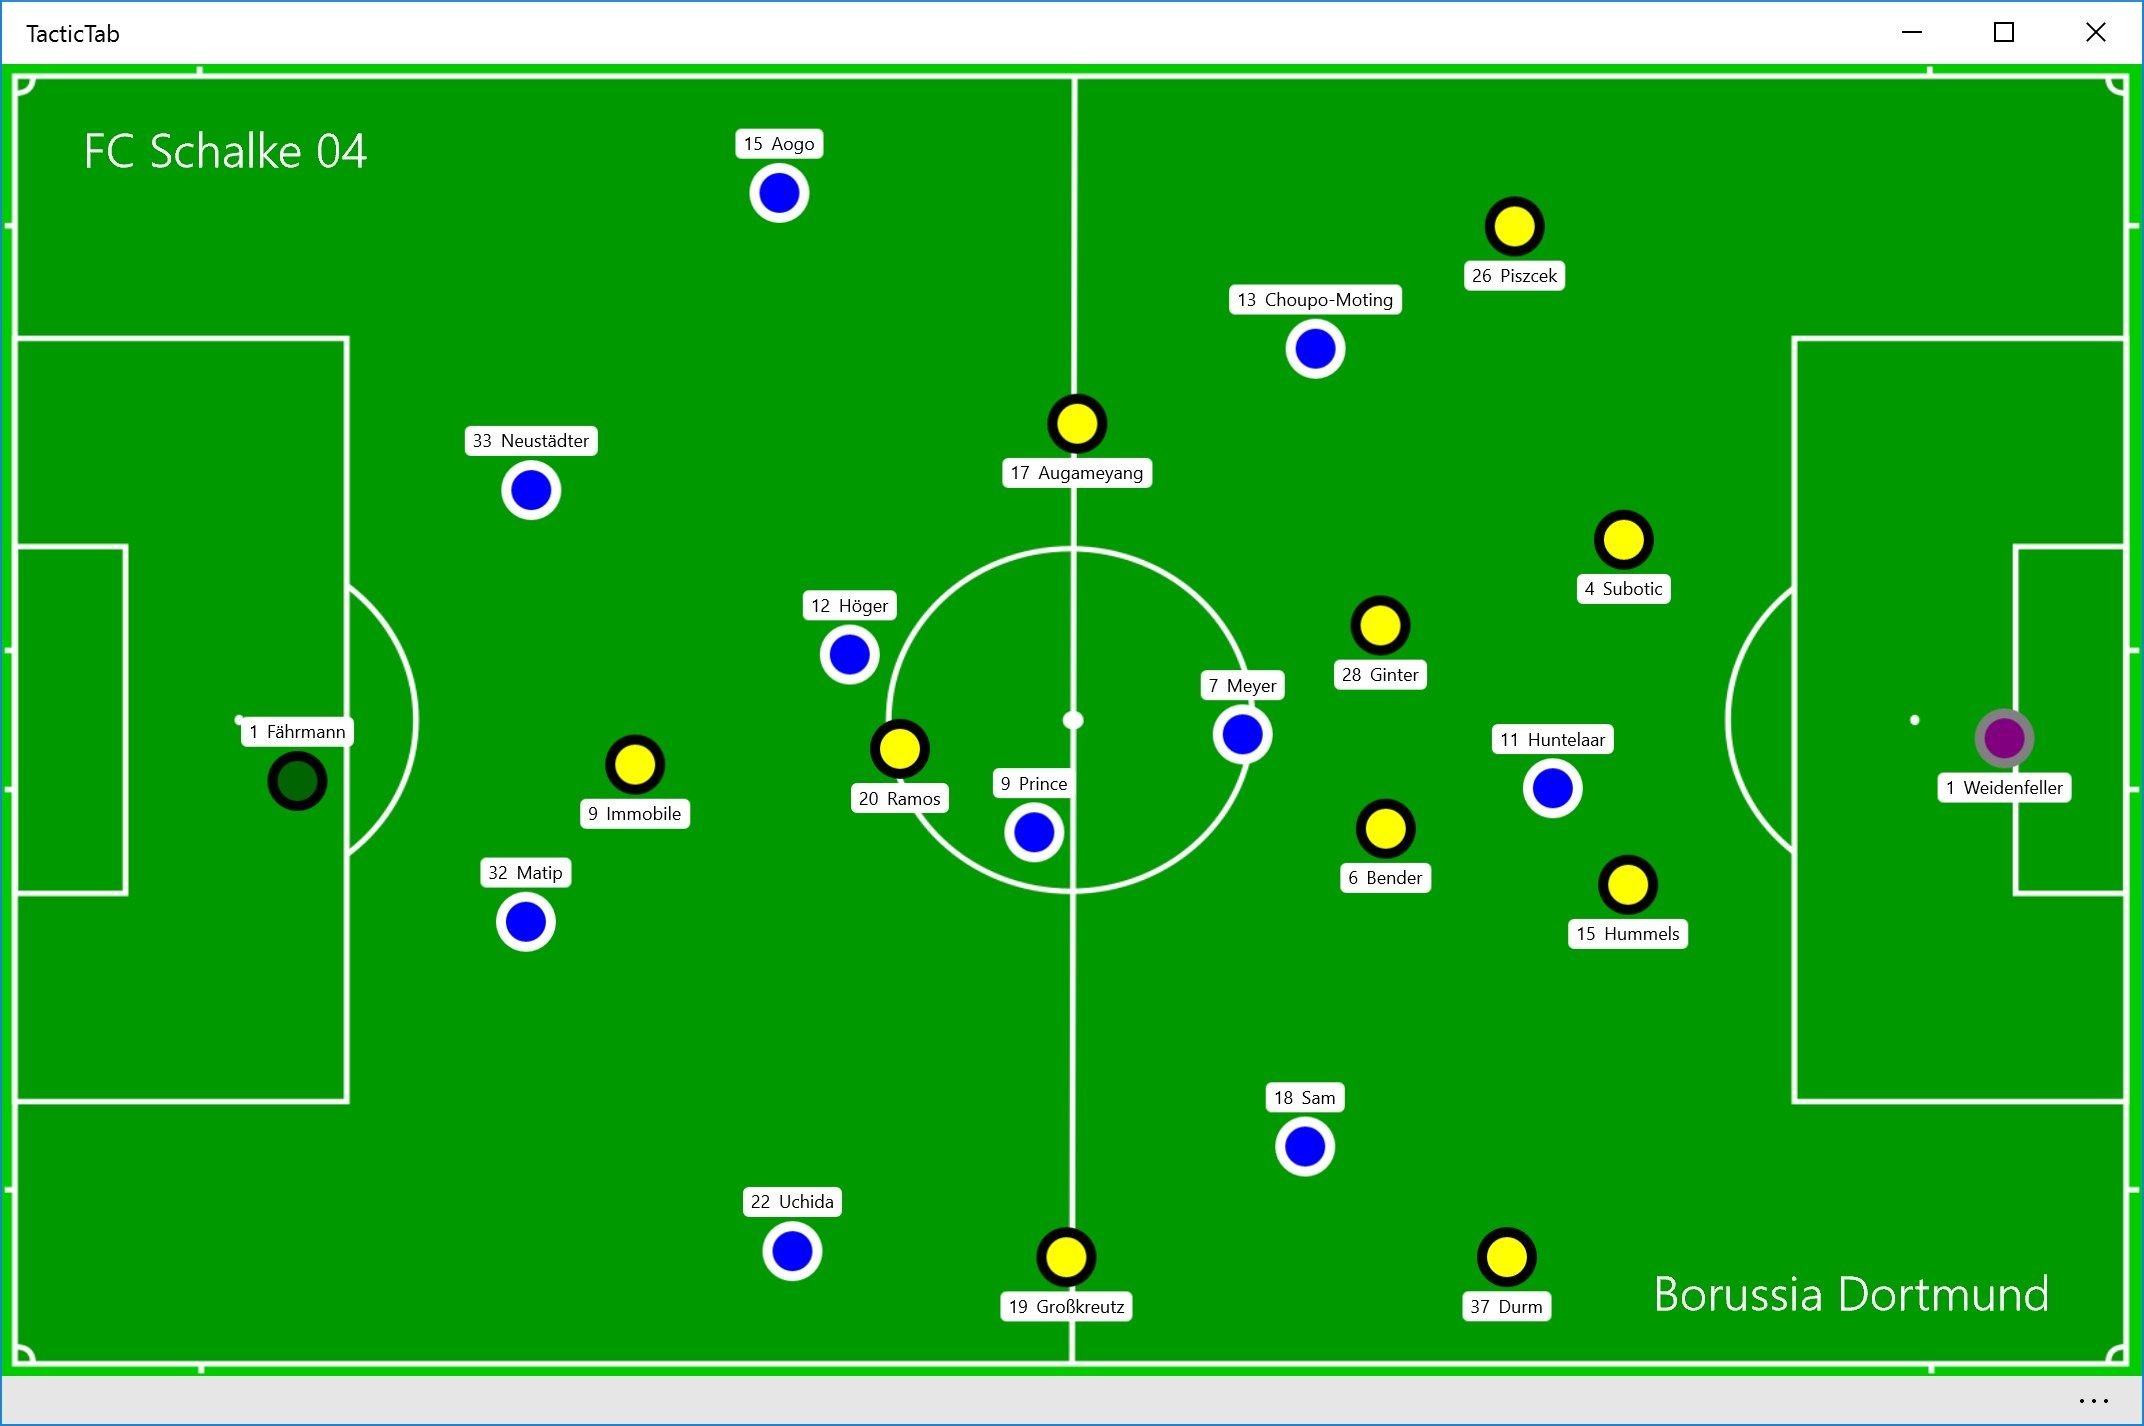 Fully edited soccer pitch on desktop. Notice the team names, player's names and numbers, colors for the different players and special colors for the goalies. Also, the field is colorful.